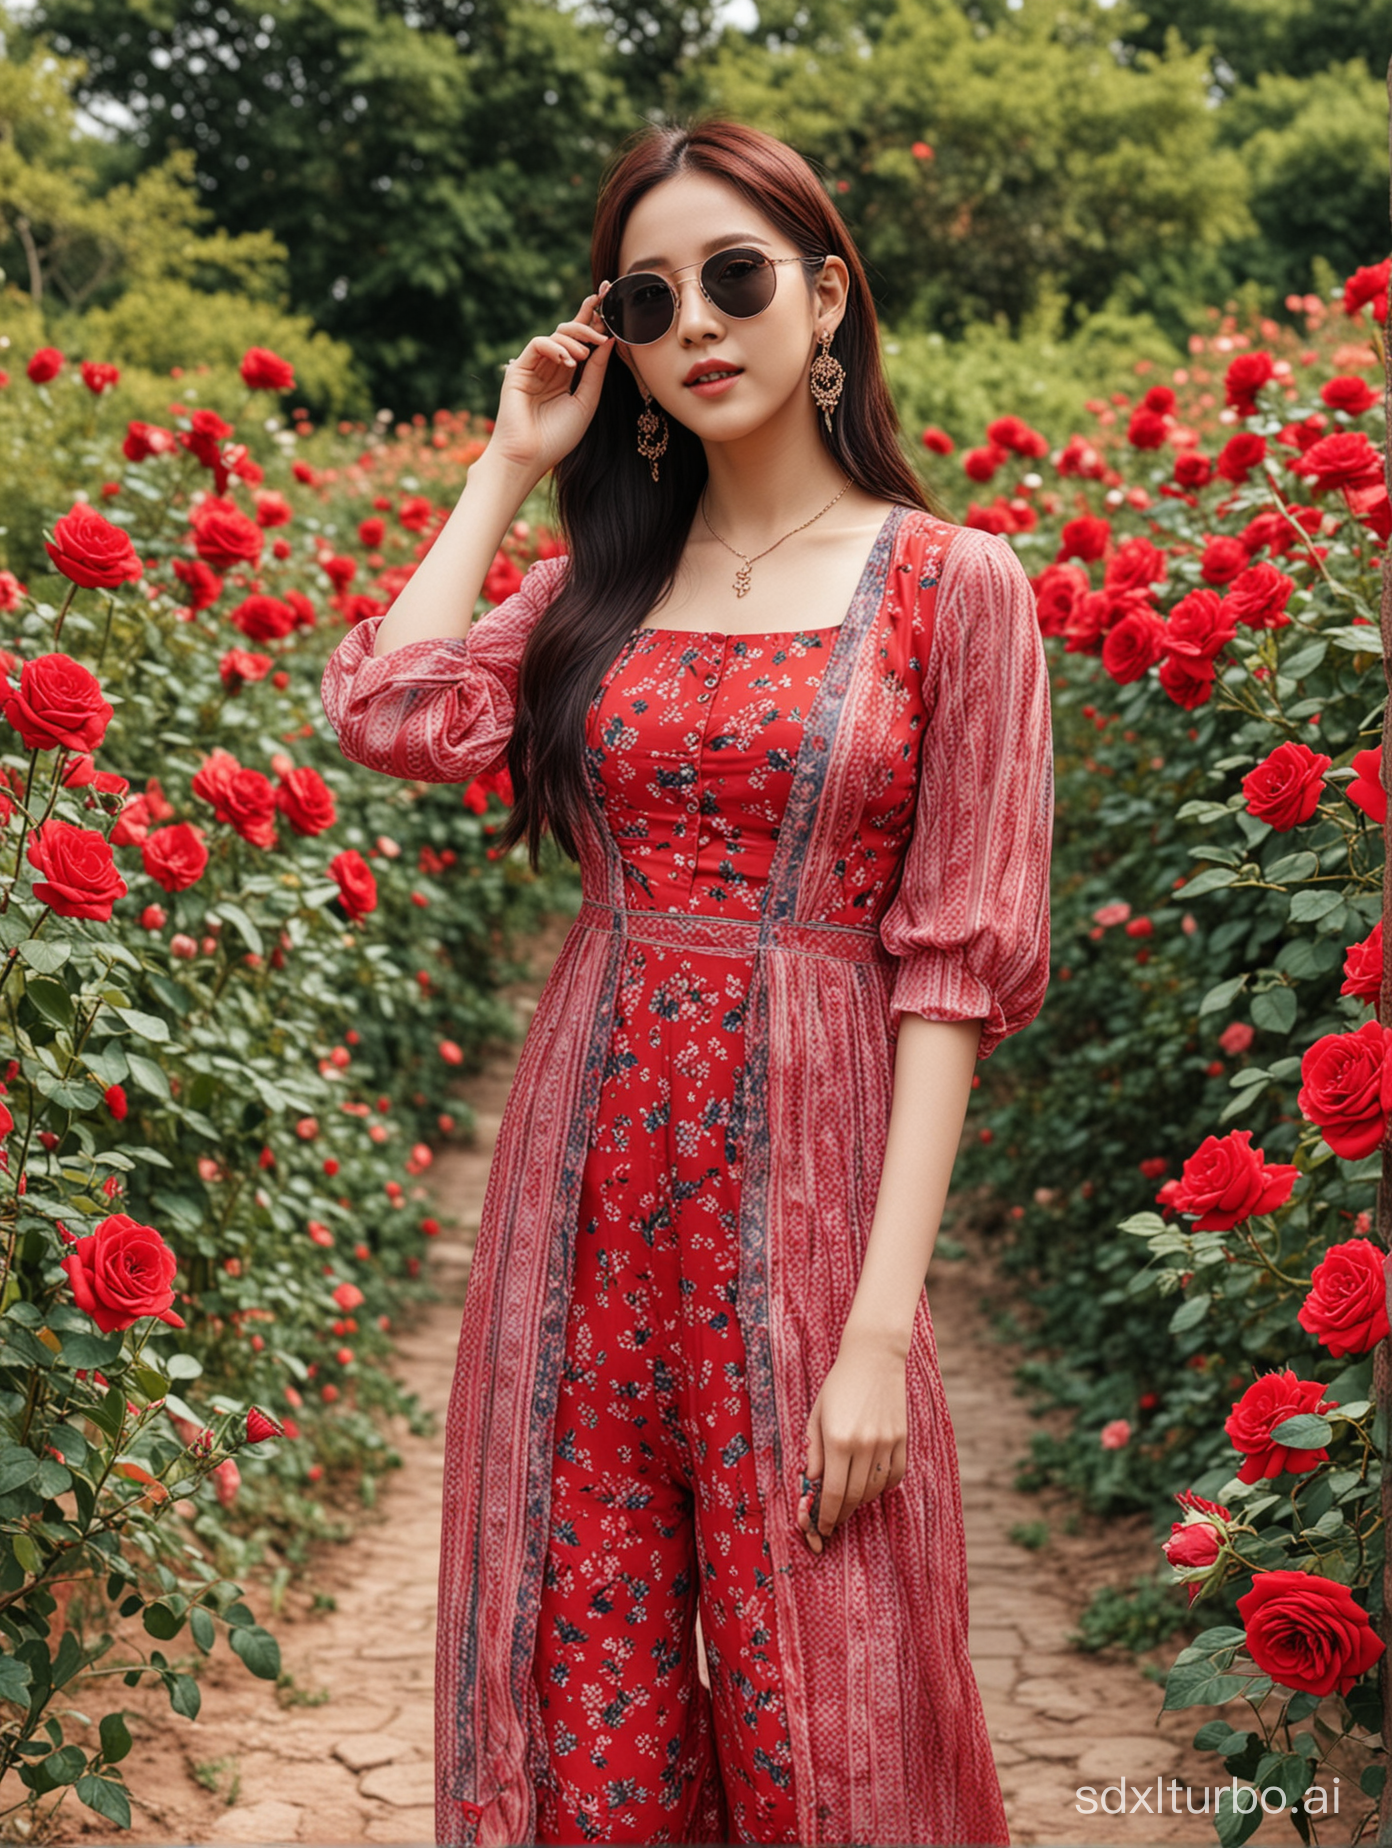 Blackpink Jisoo wearing a colorful salwar kameez and sunglasses and beautiful hands in a red rose garden,
